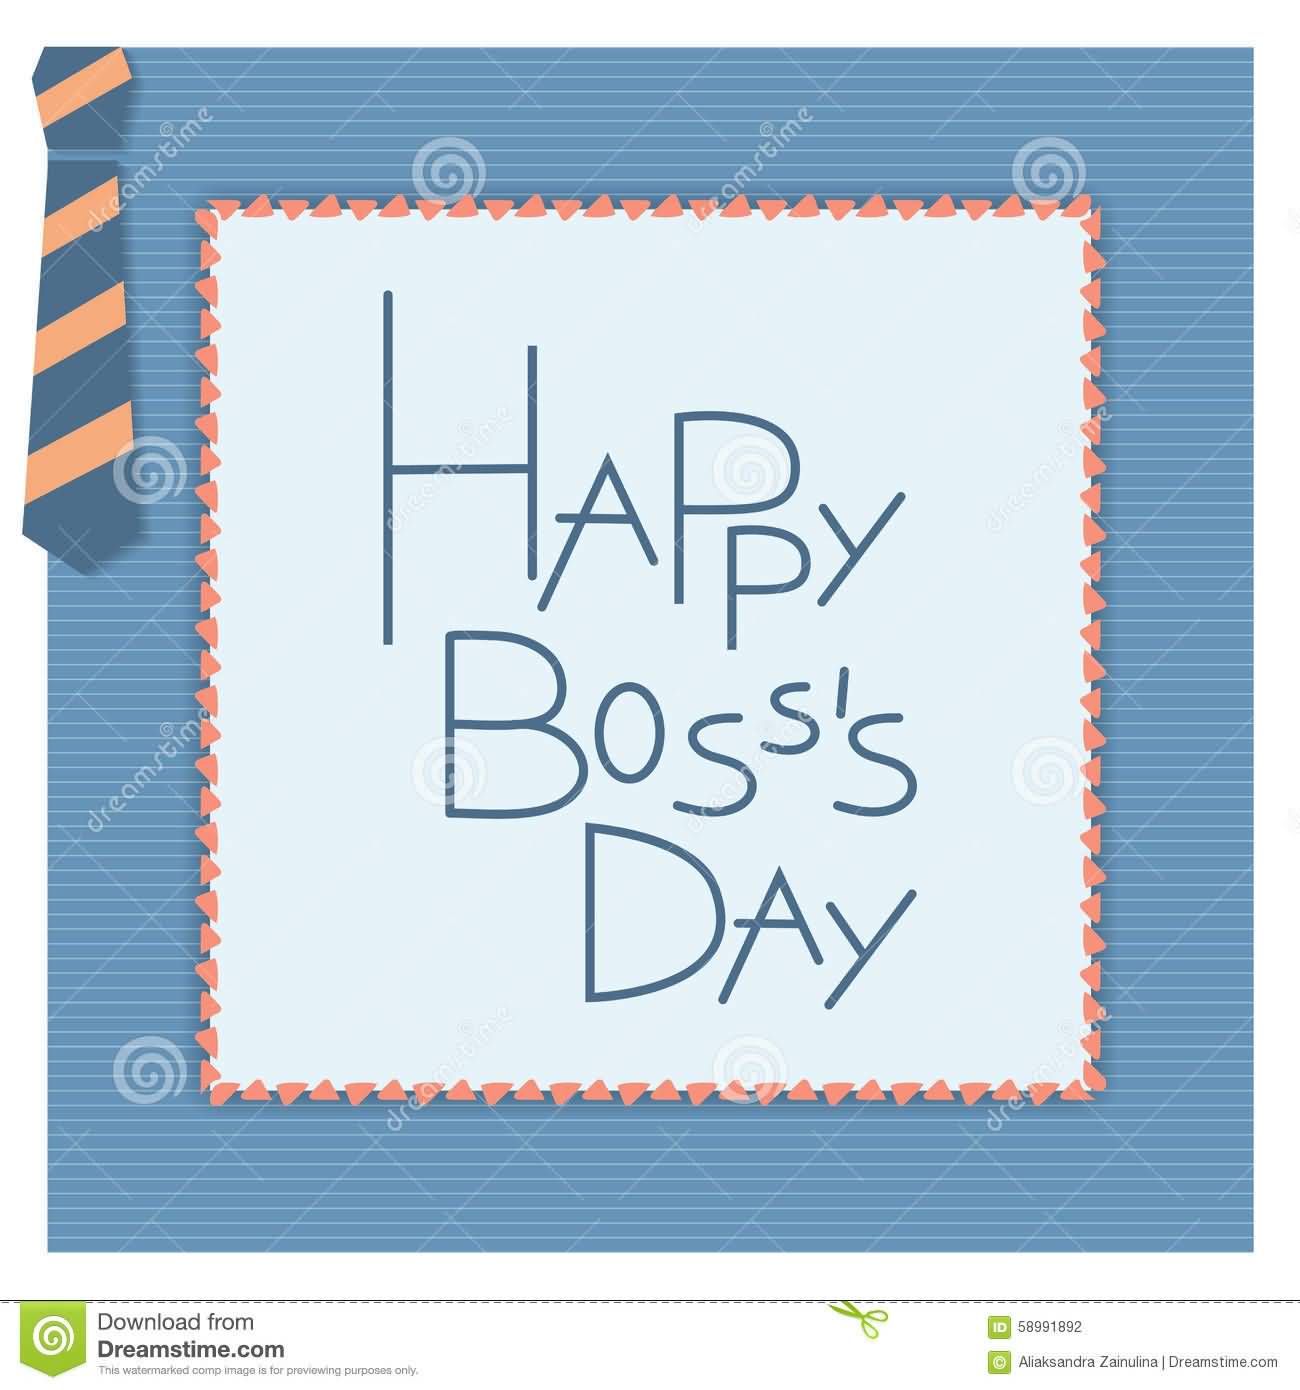 Happy Boss's Day 2016 Greeting Card Image